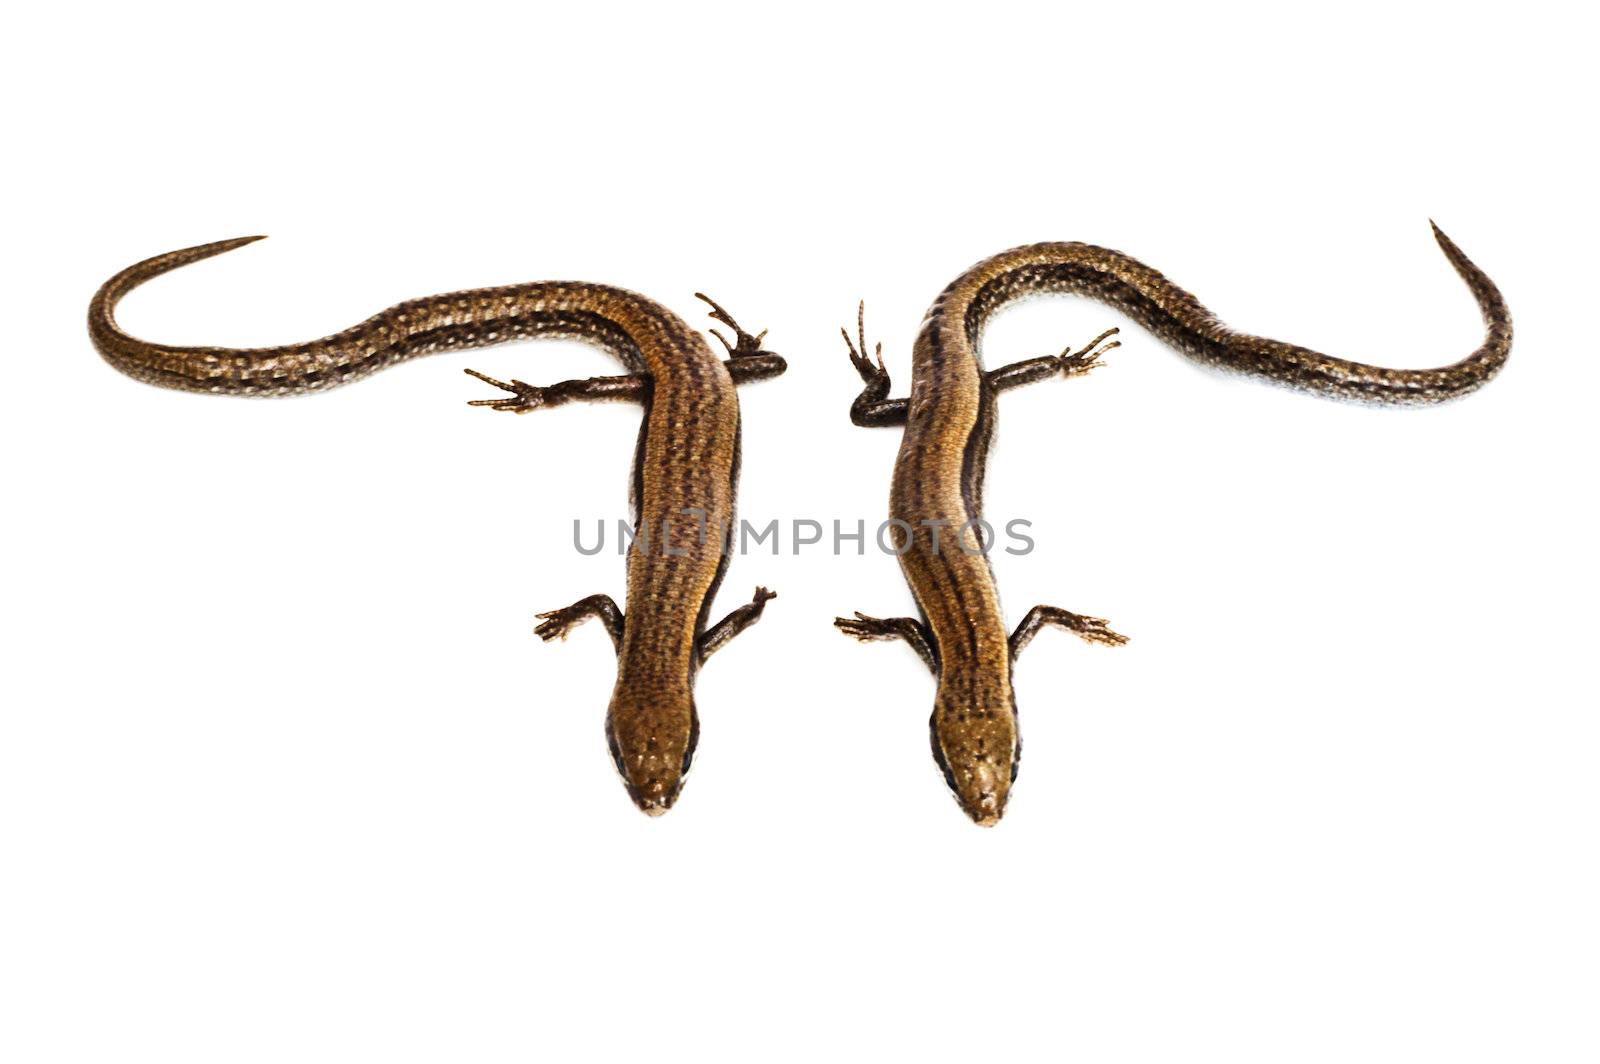 Two small lizards on a white background  by schankz